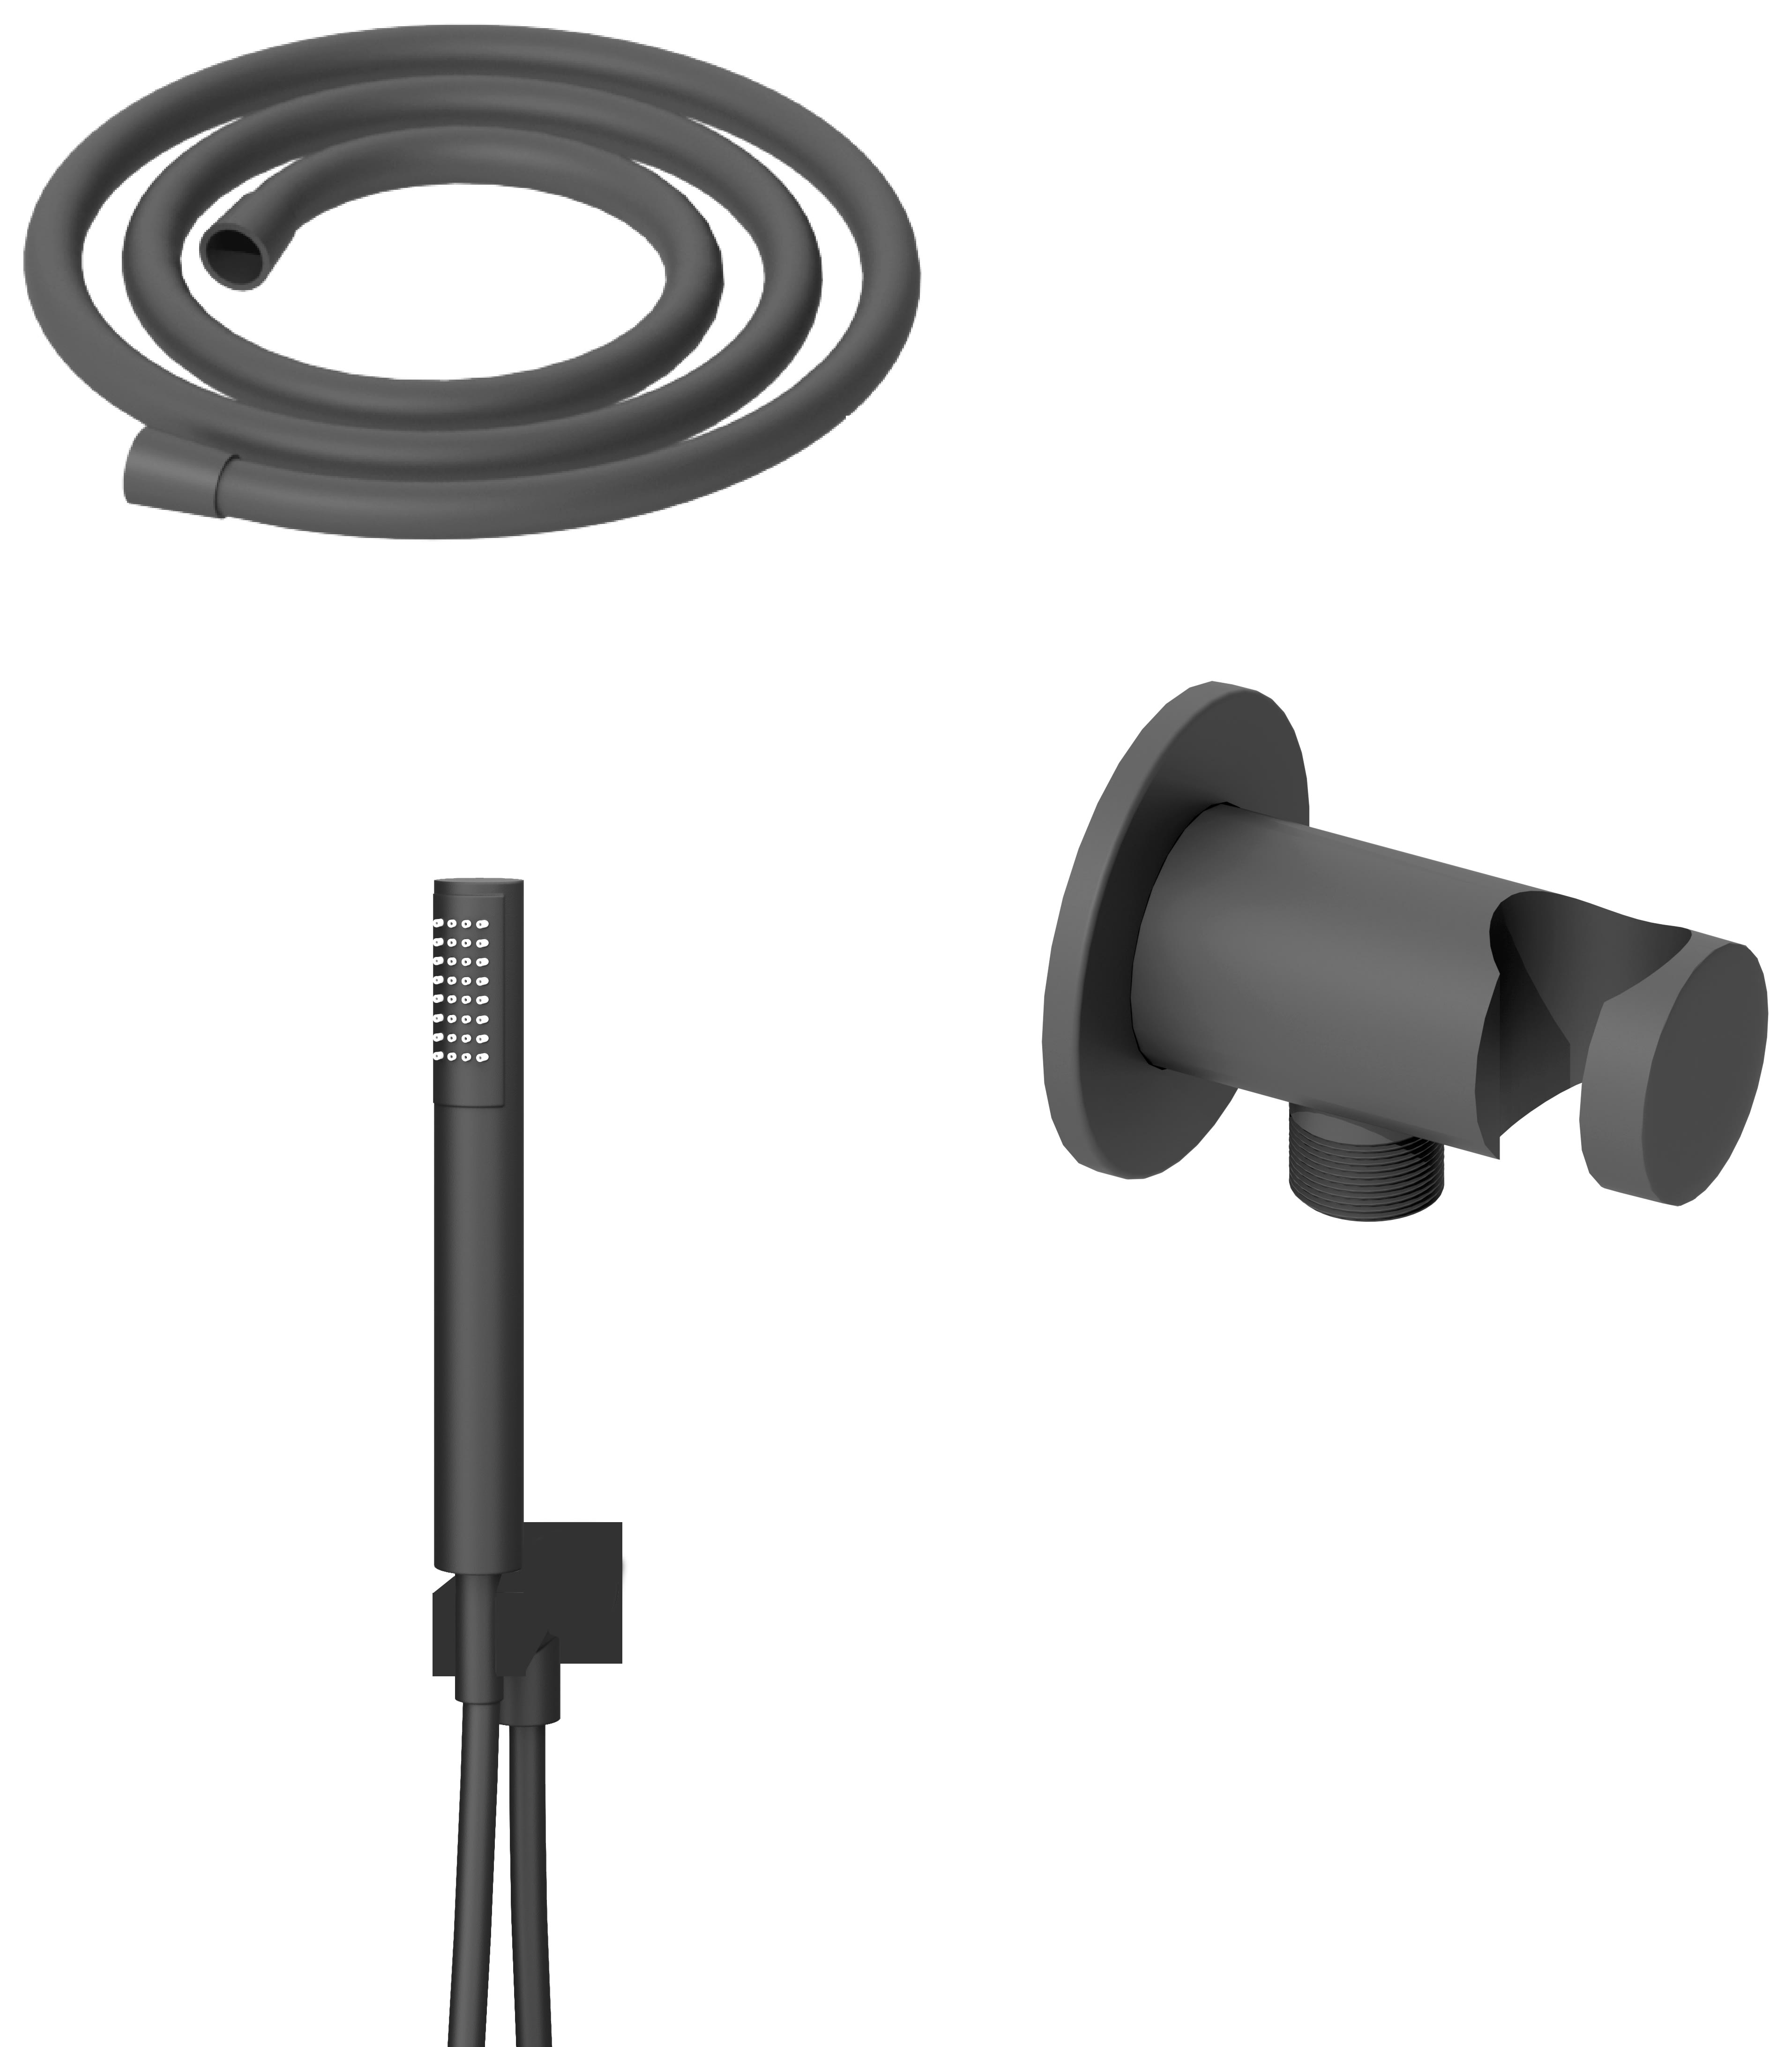 Hadleigh Shower Wall Outlet & Holder, 1.25m Hose